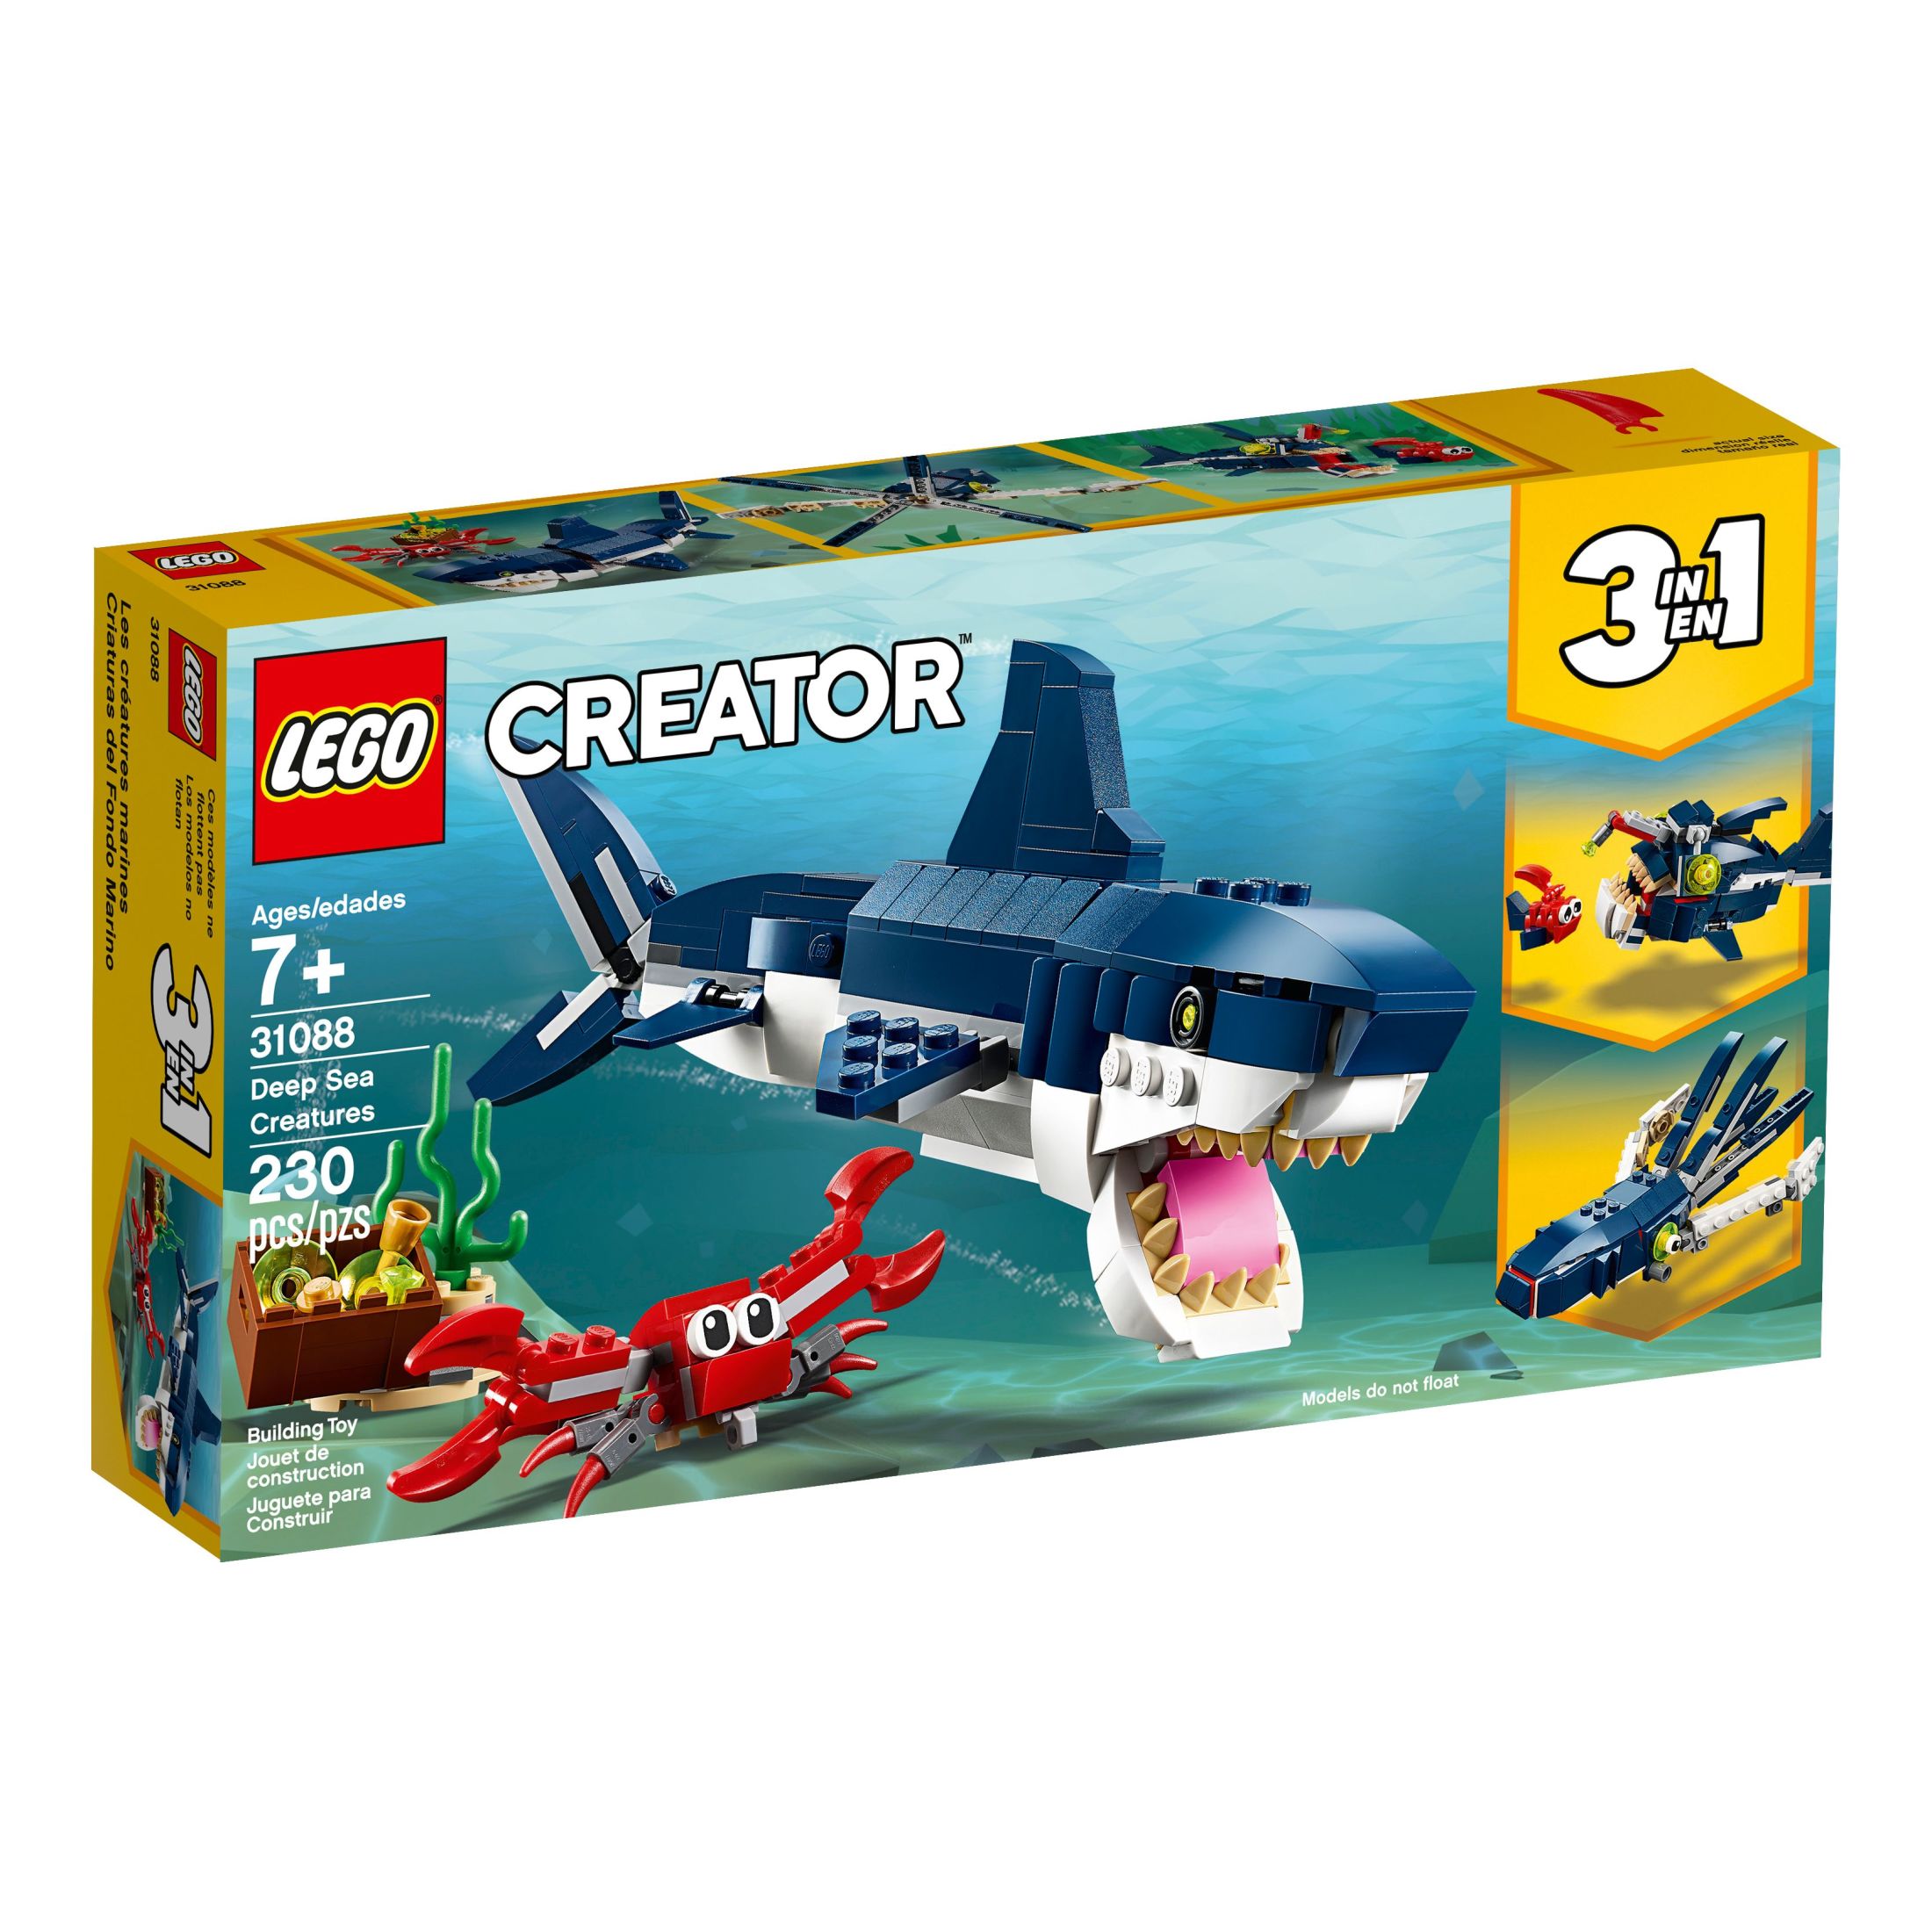 LEGO Creator 3 in 1 Deep Sea Creatures, Transforms from Shark and Crab to Squid to Angler Fish, Sea Animal Toys, Gifts for 7 Plus Year Old Girls and Boys, 31088 - image 3 of 6